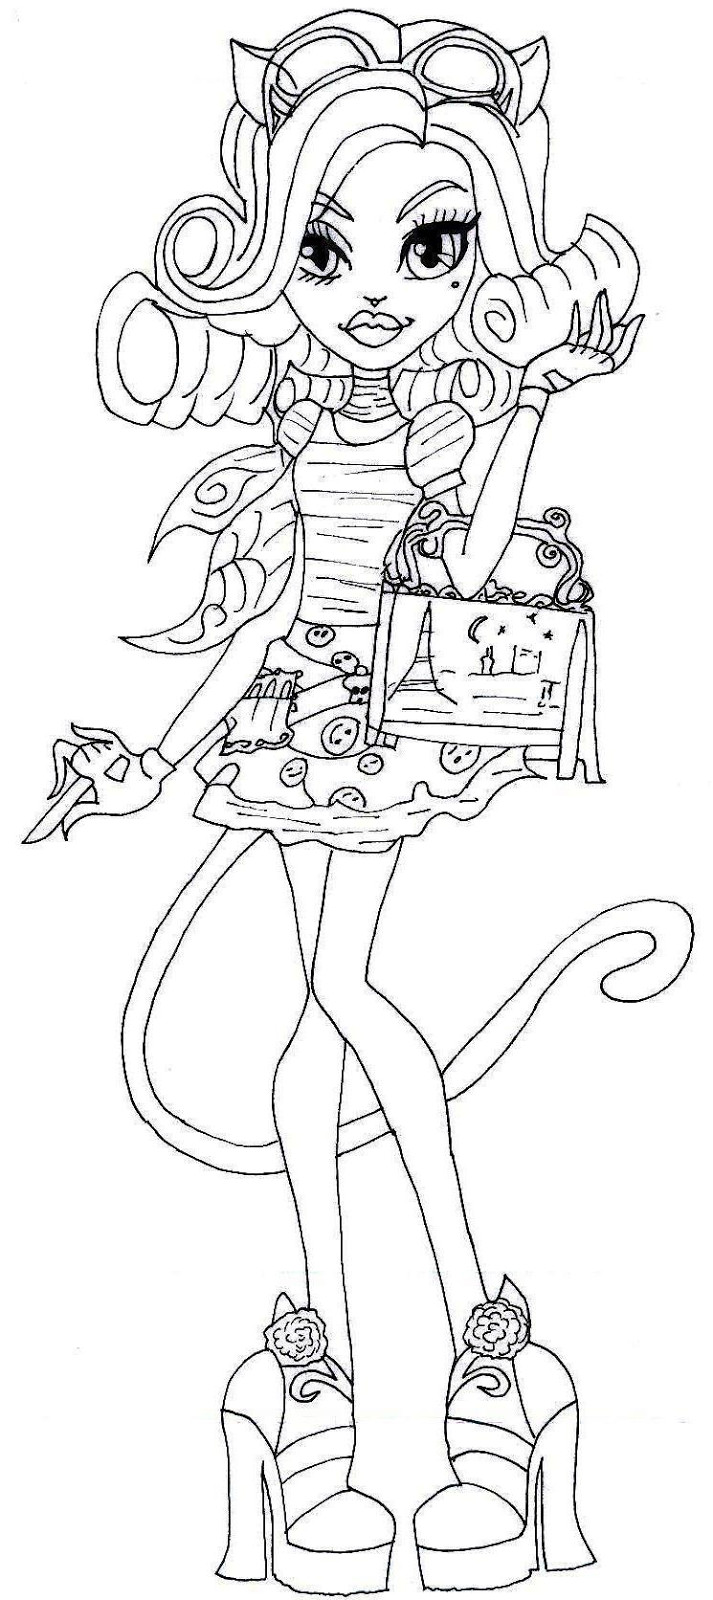 Online Printable Coloring Pages
 Free Printable Monster High Coloring Pages Free Printable